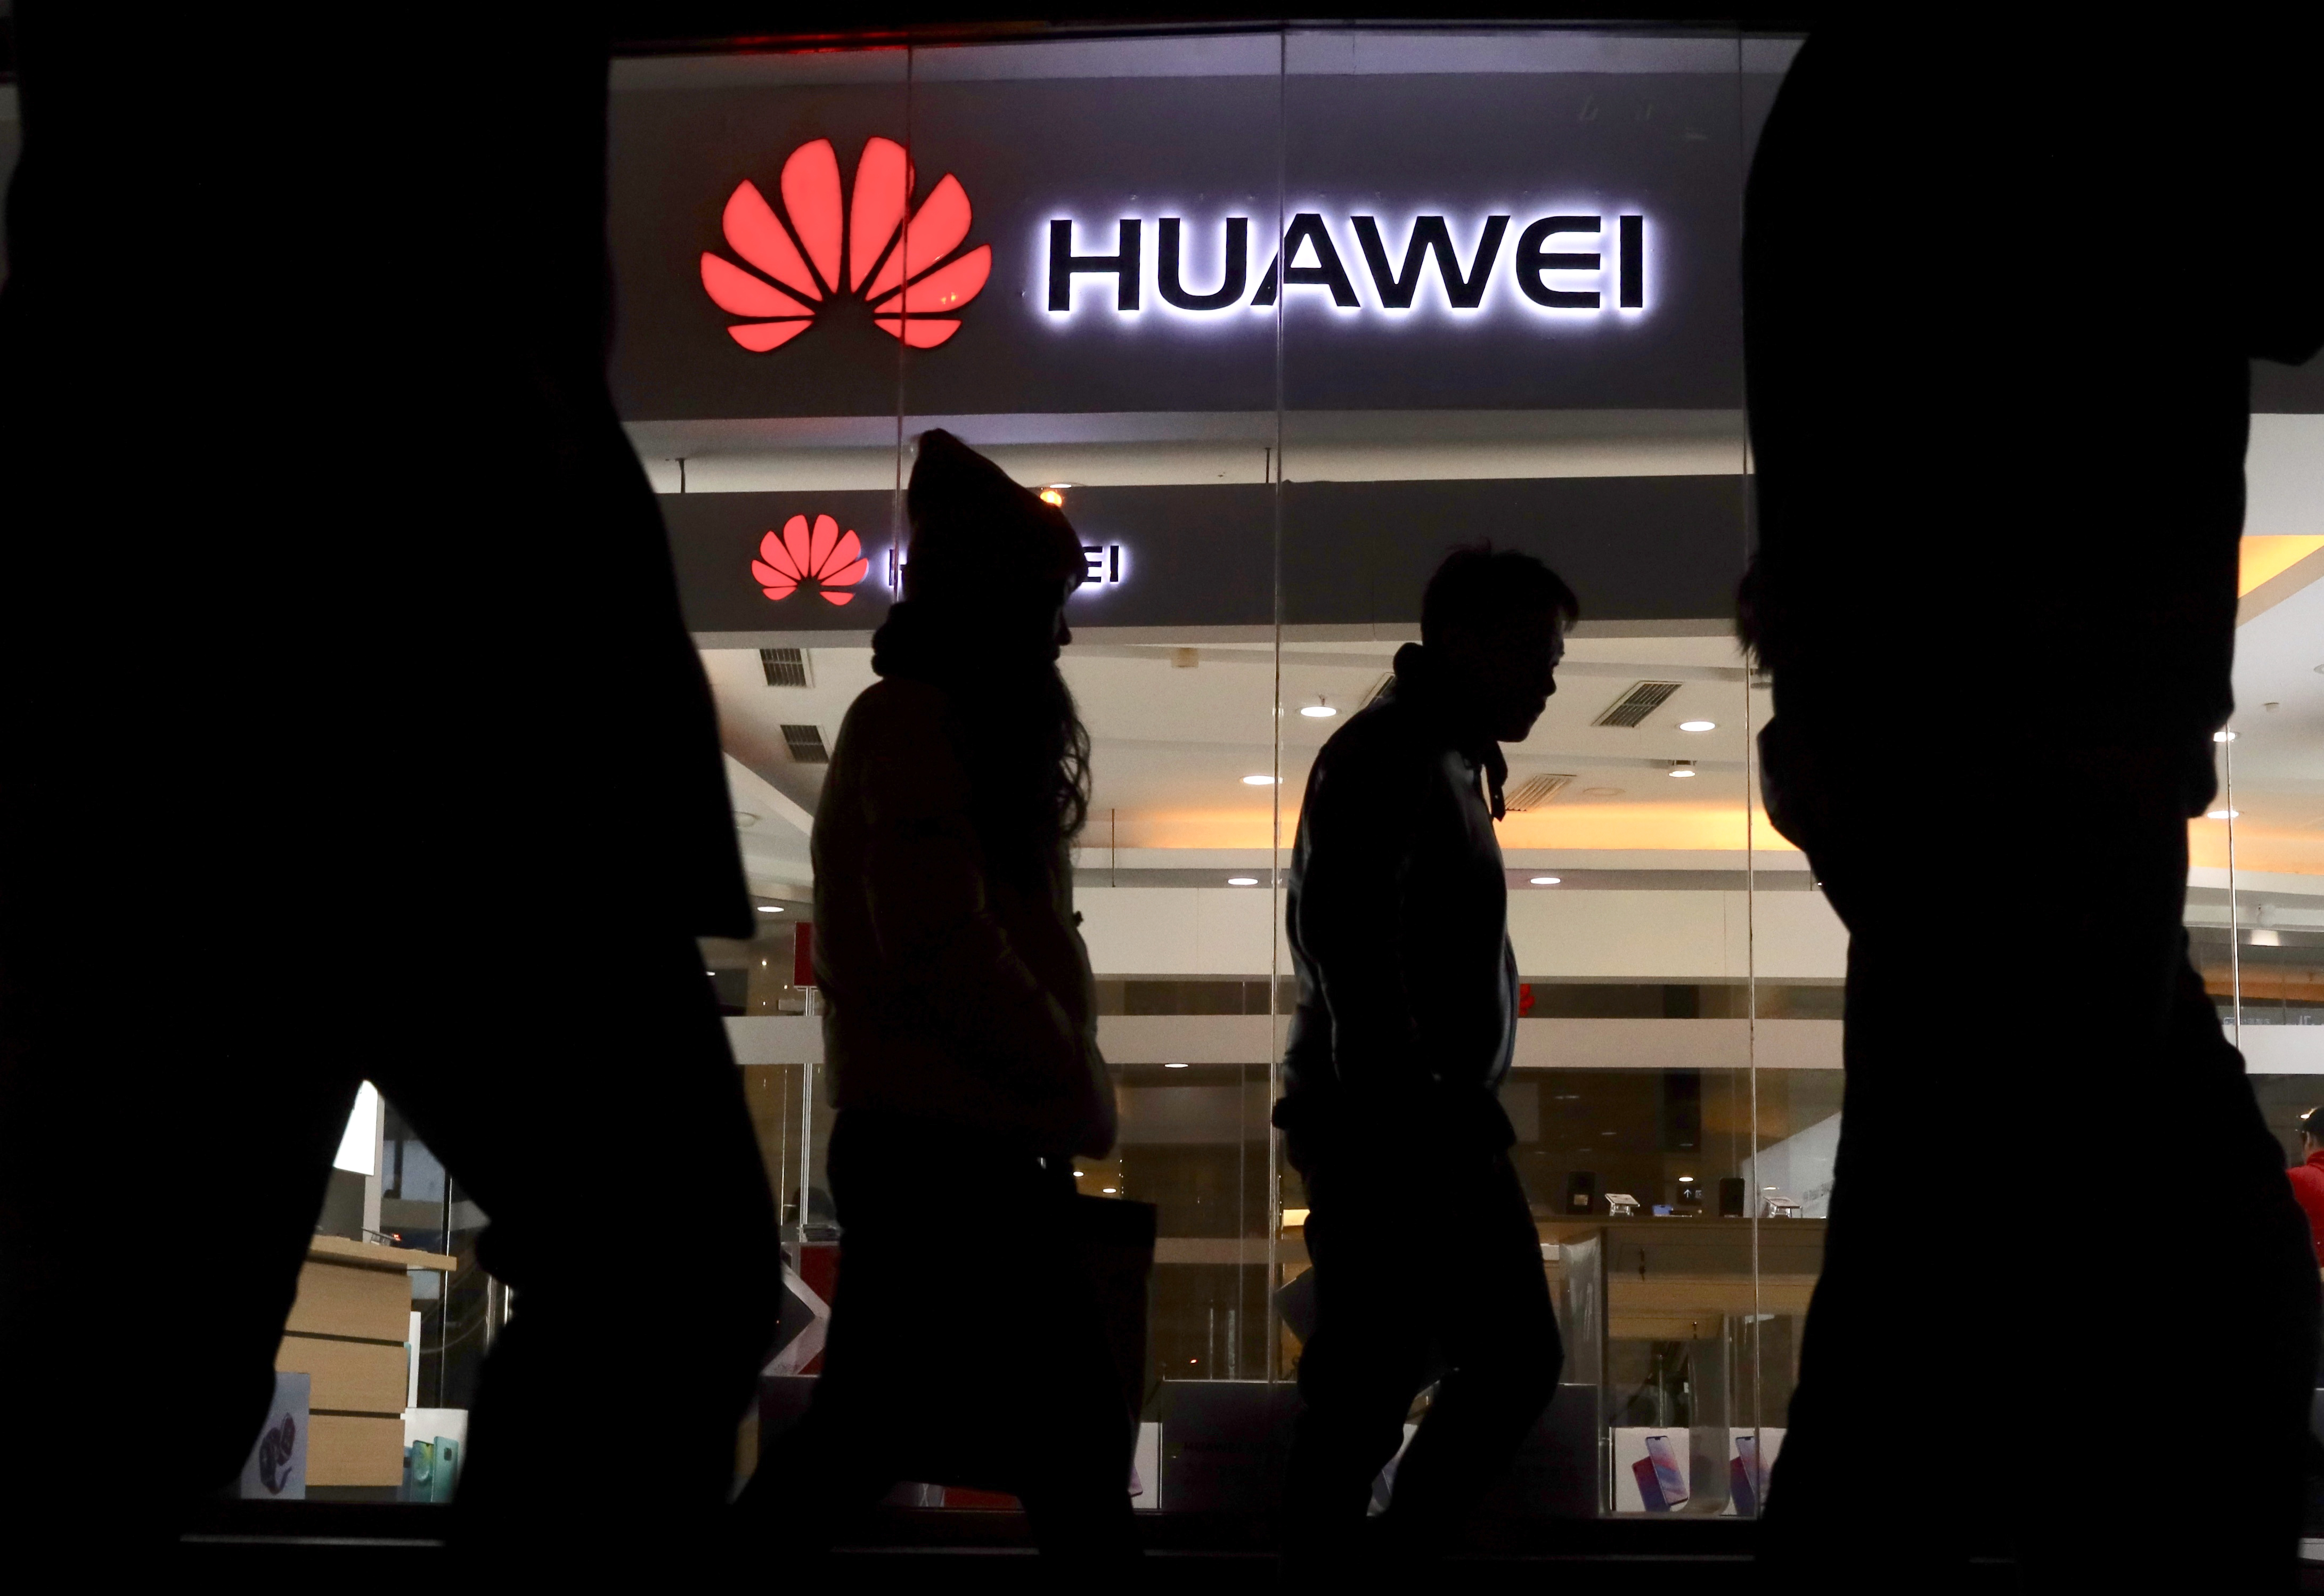 jammer nut key points | Executive’s Arrest, Security Worries Stymie Huawei’s Reach